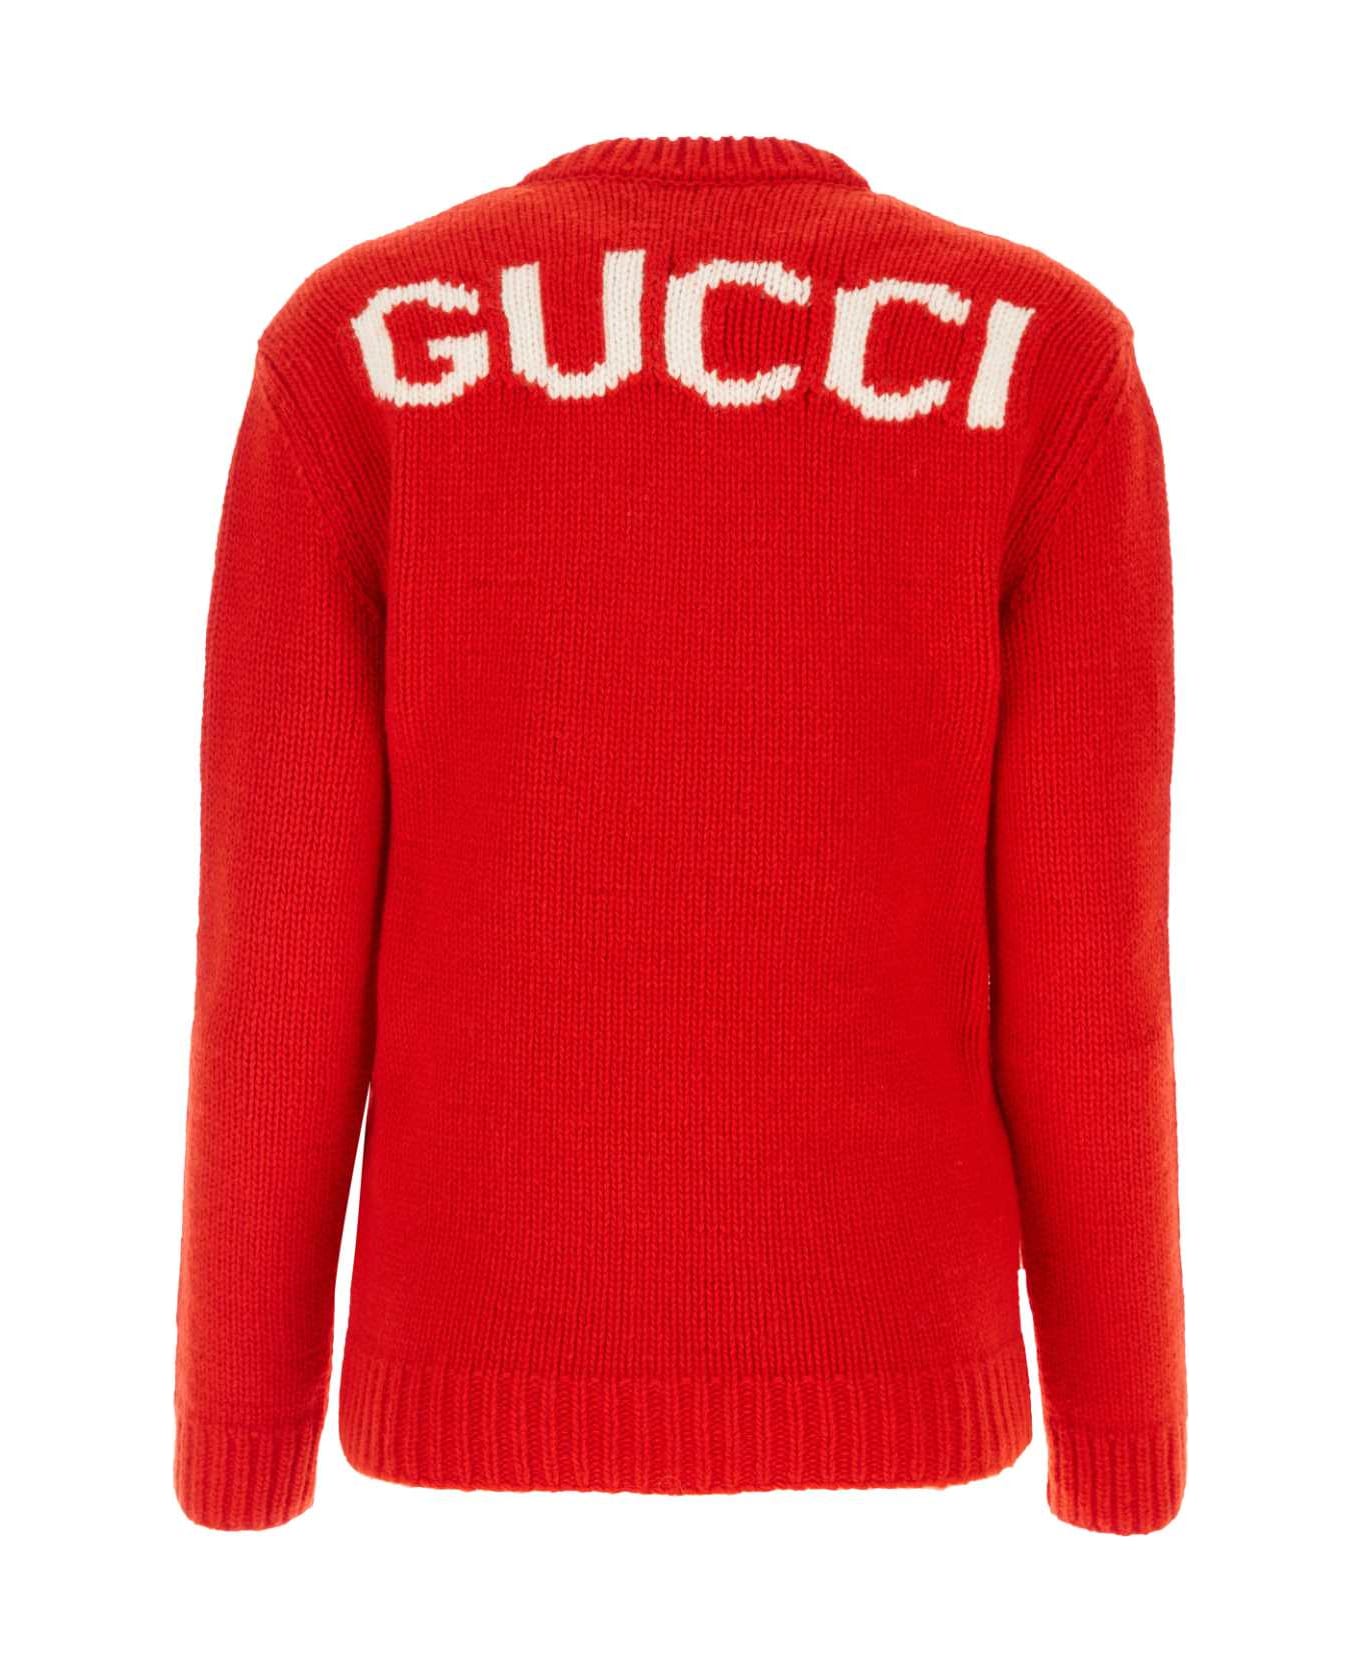 Gucci want Red Wool Sweater - REDIVORY